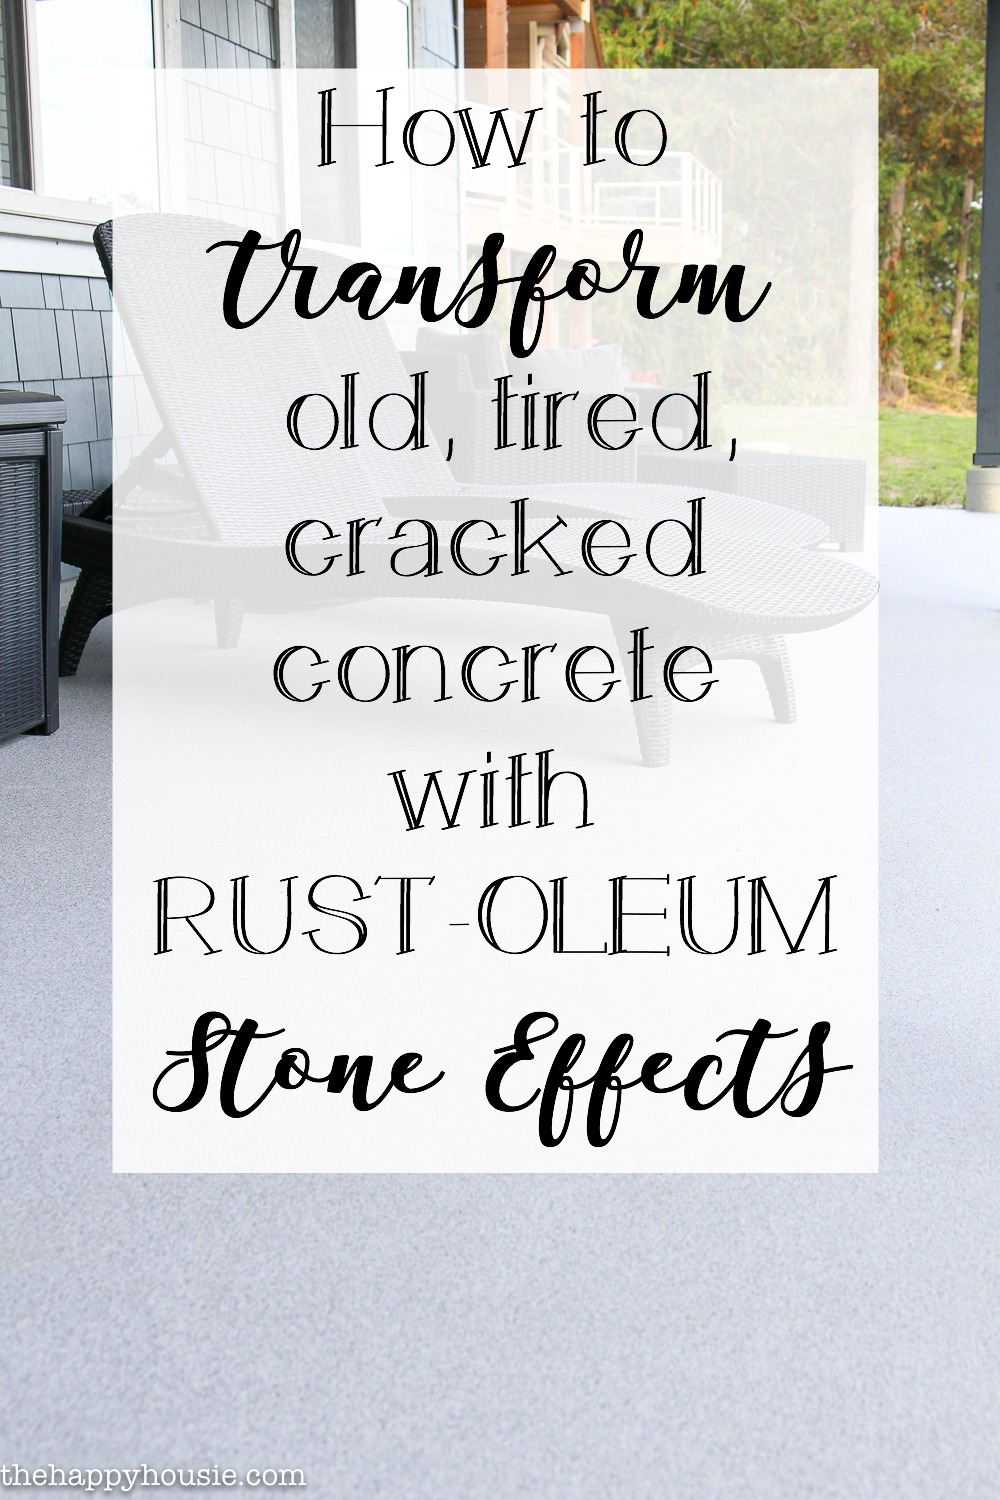 How to transform old, tired, cracked concrete with rust-oleum stone effects poster.